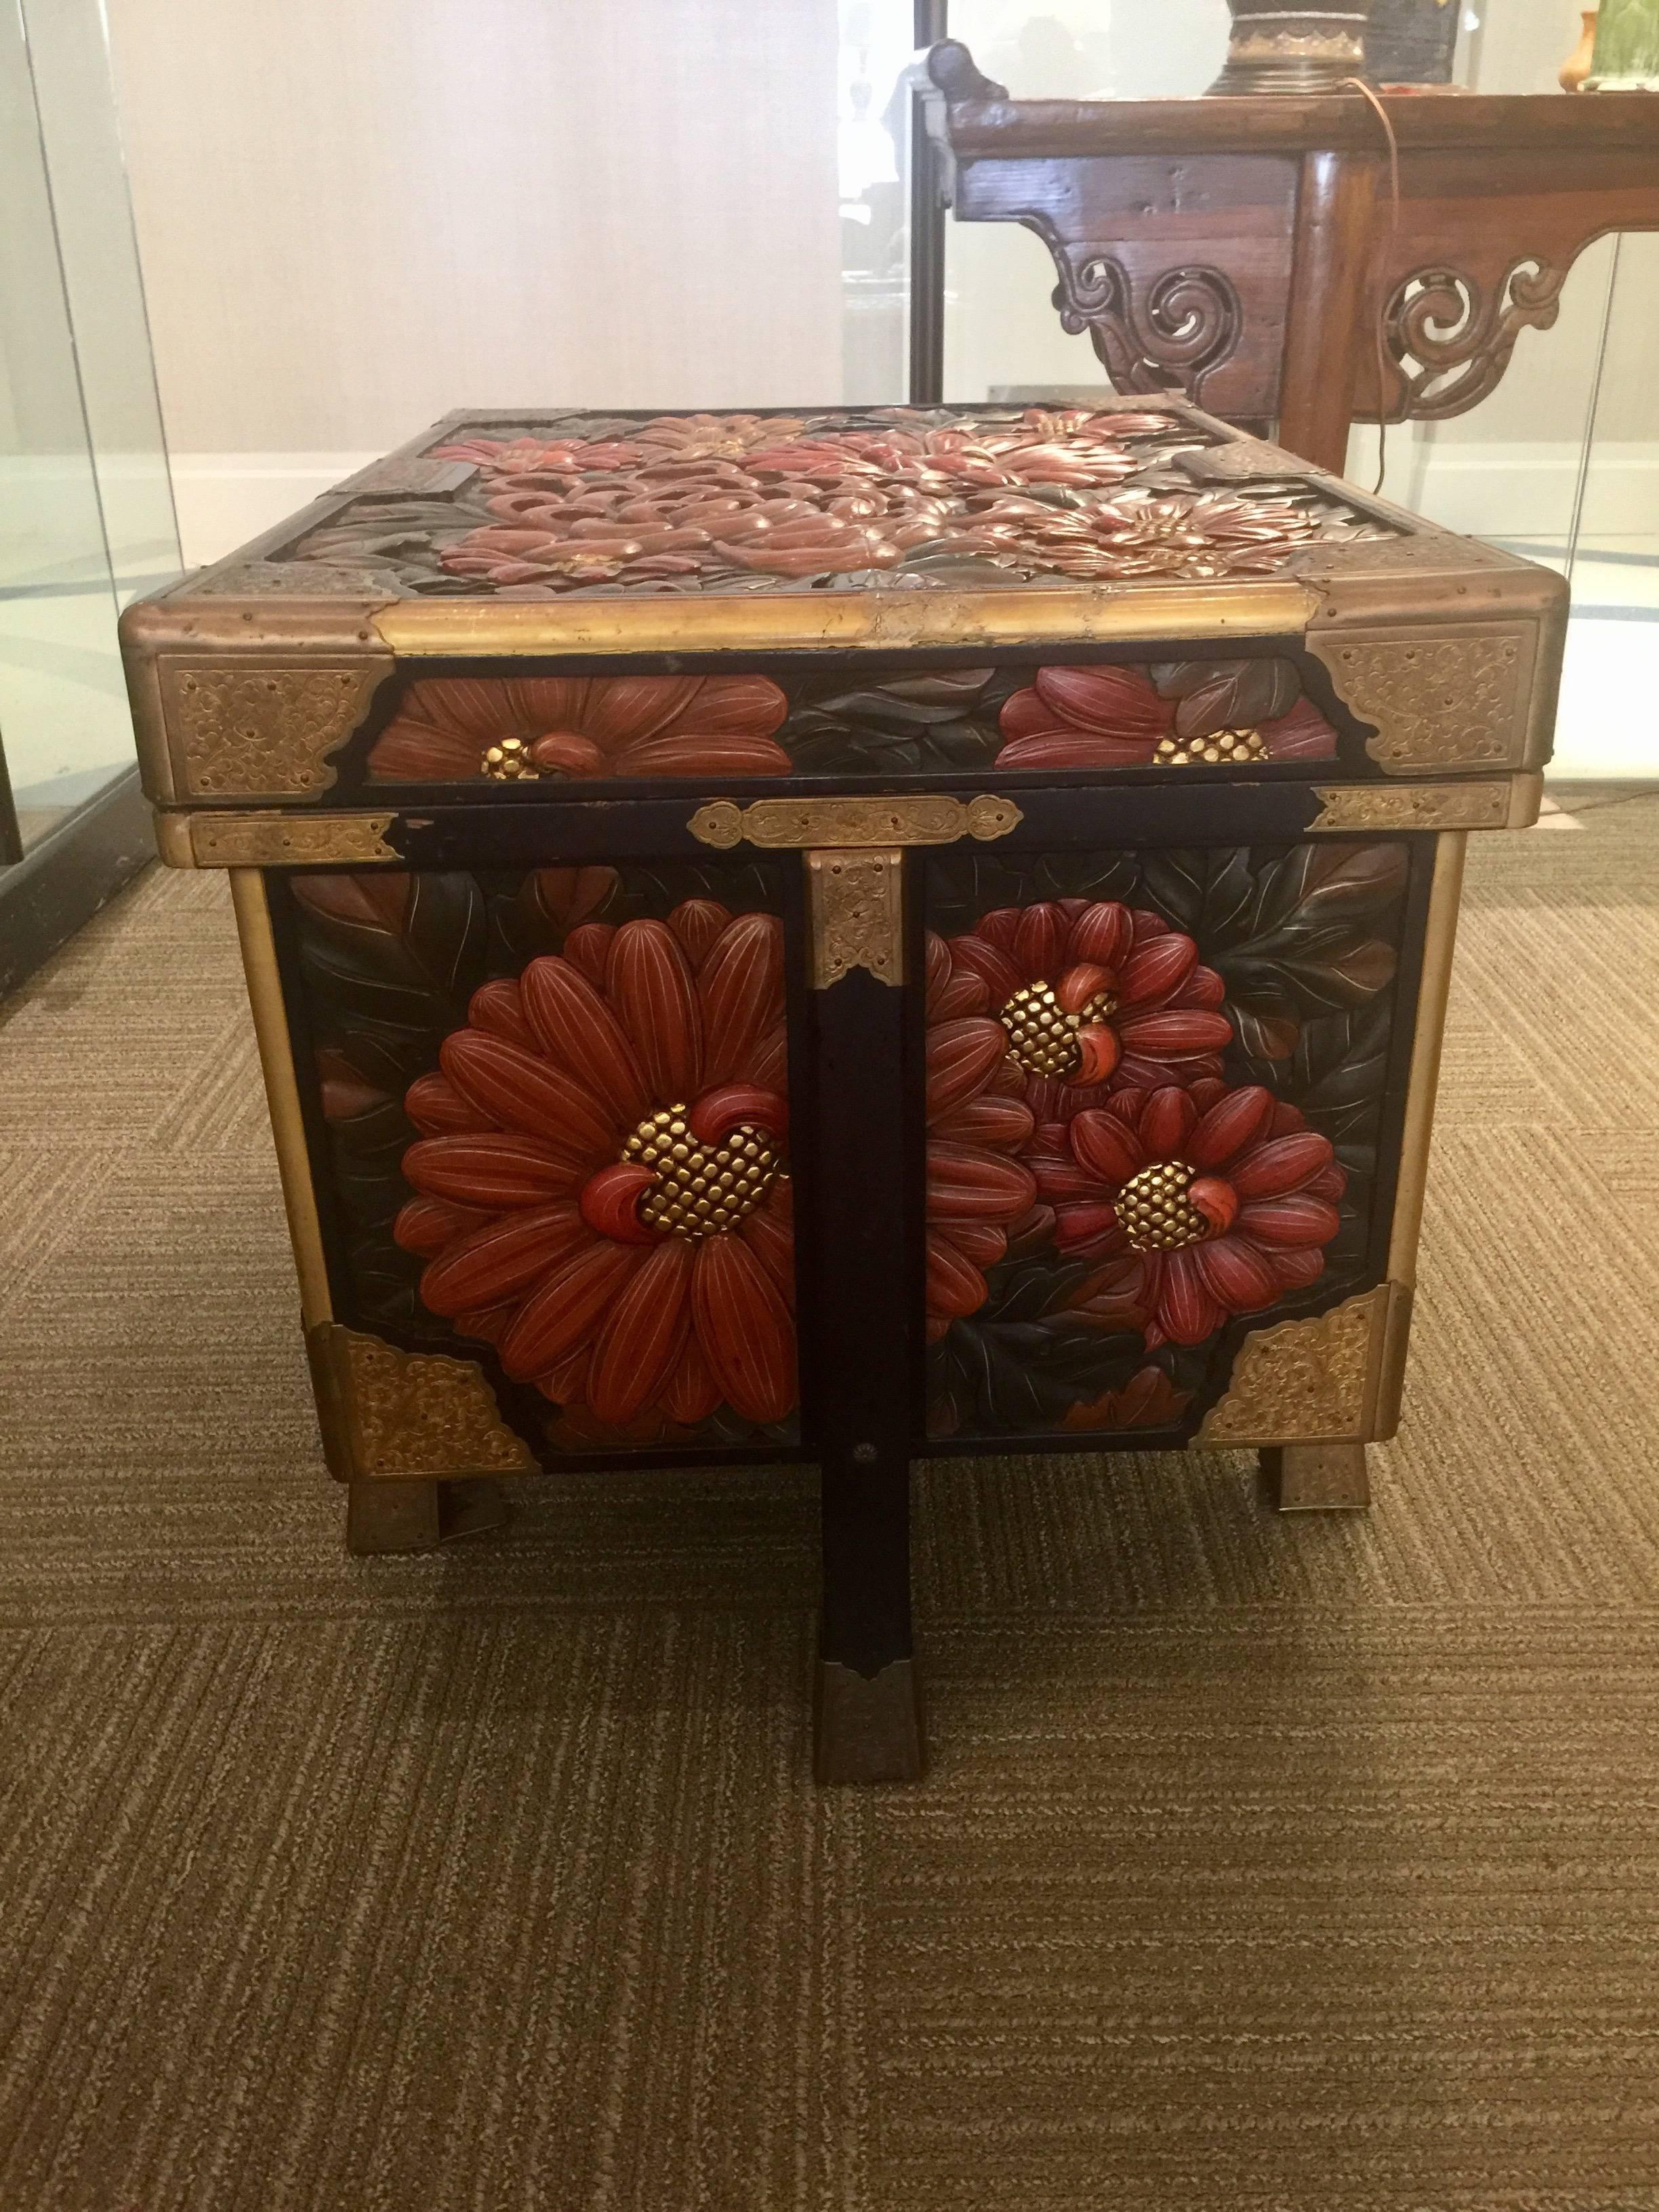 Lacquered 19th Century Japanese Armor Storage Trunk